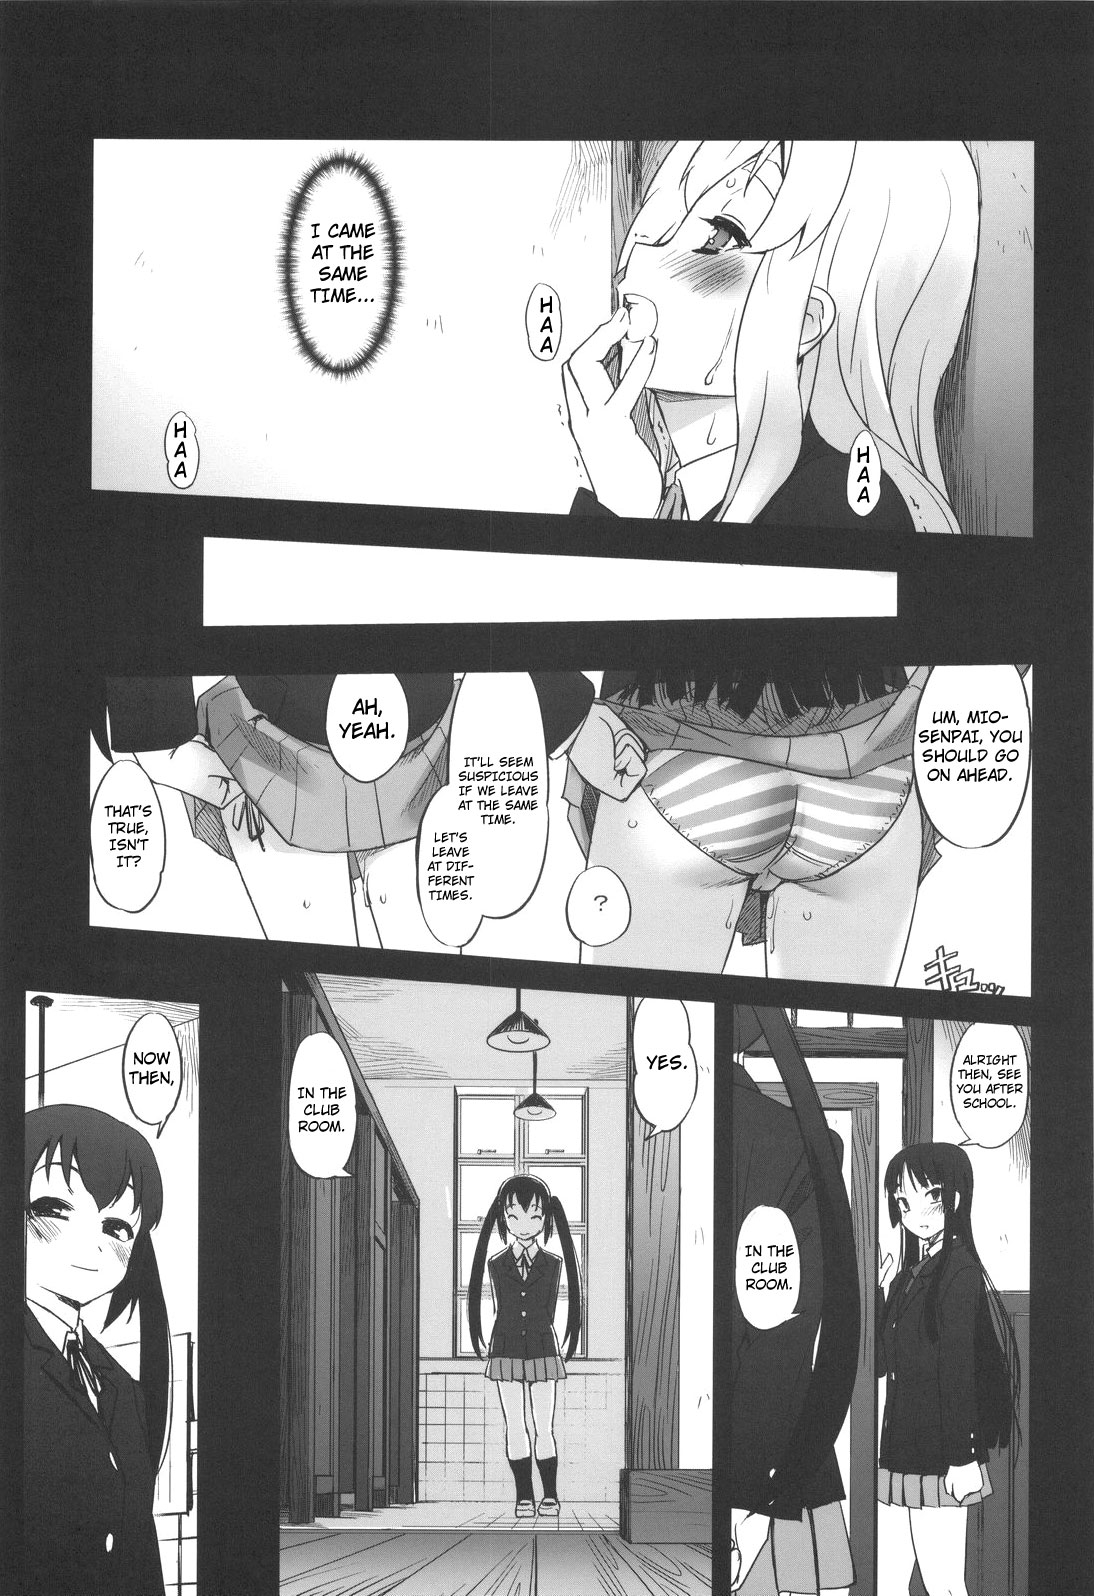 (C76) [G-Power! (Sasayuki)] Nekomimi to Toilet to Houkago no Bushitsu | Cat Ears And A Restroom And The Club Room After School (K-ON) [English] [Nicchiscans-4Dawgz] 15